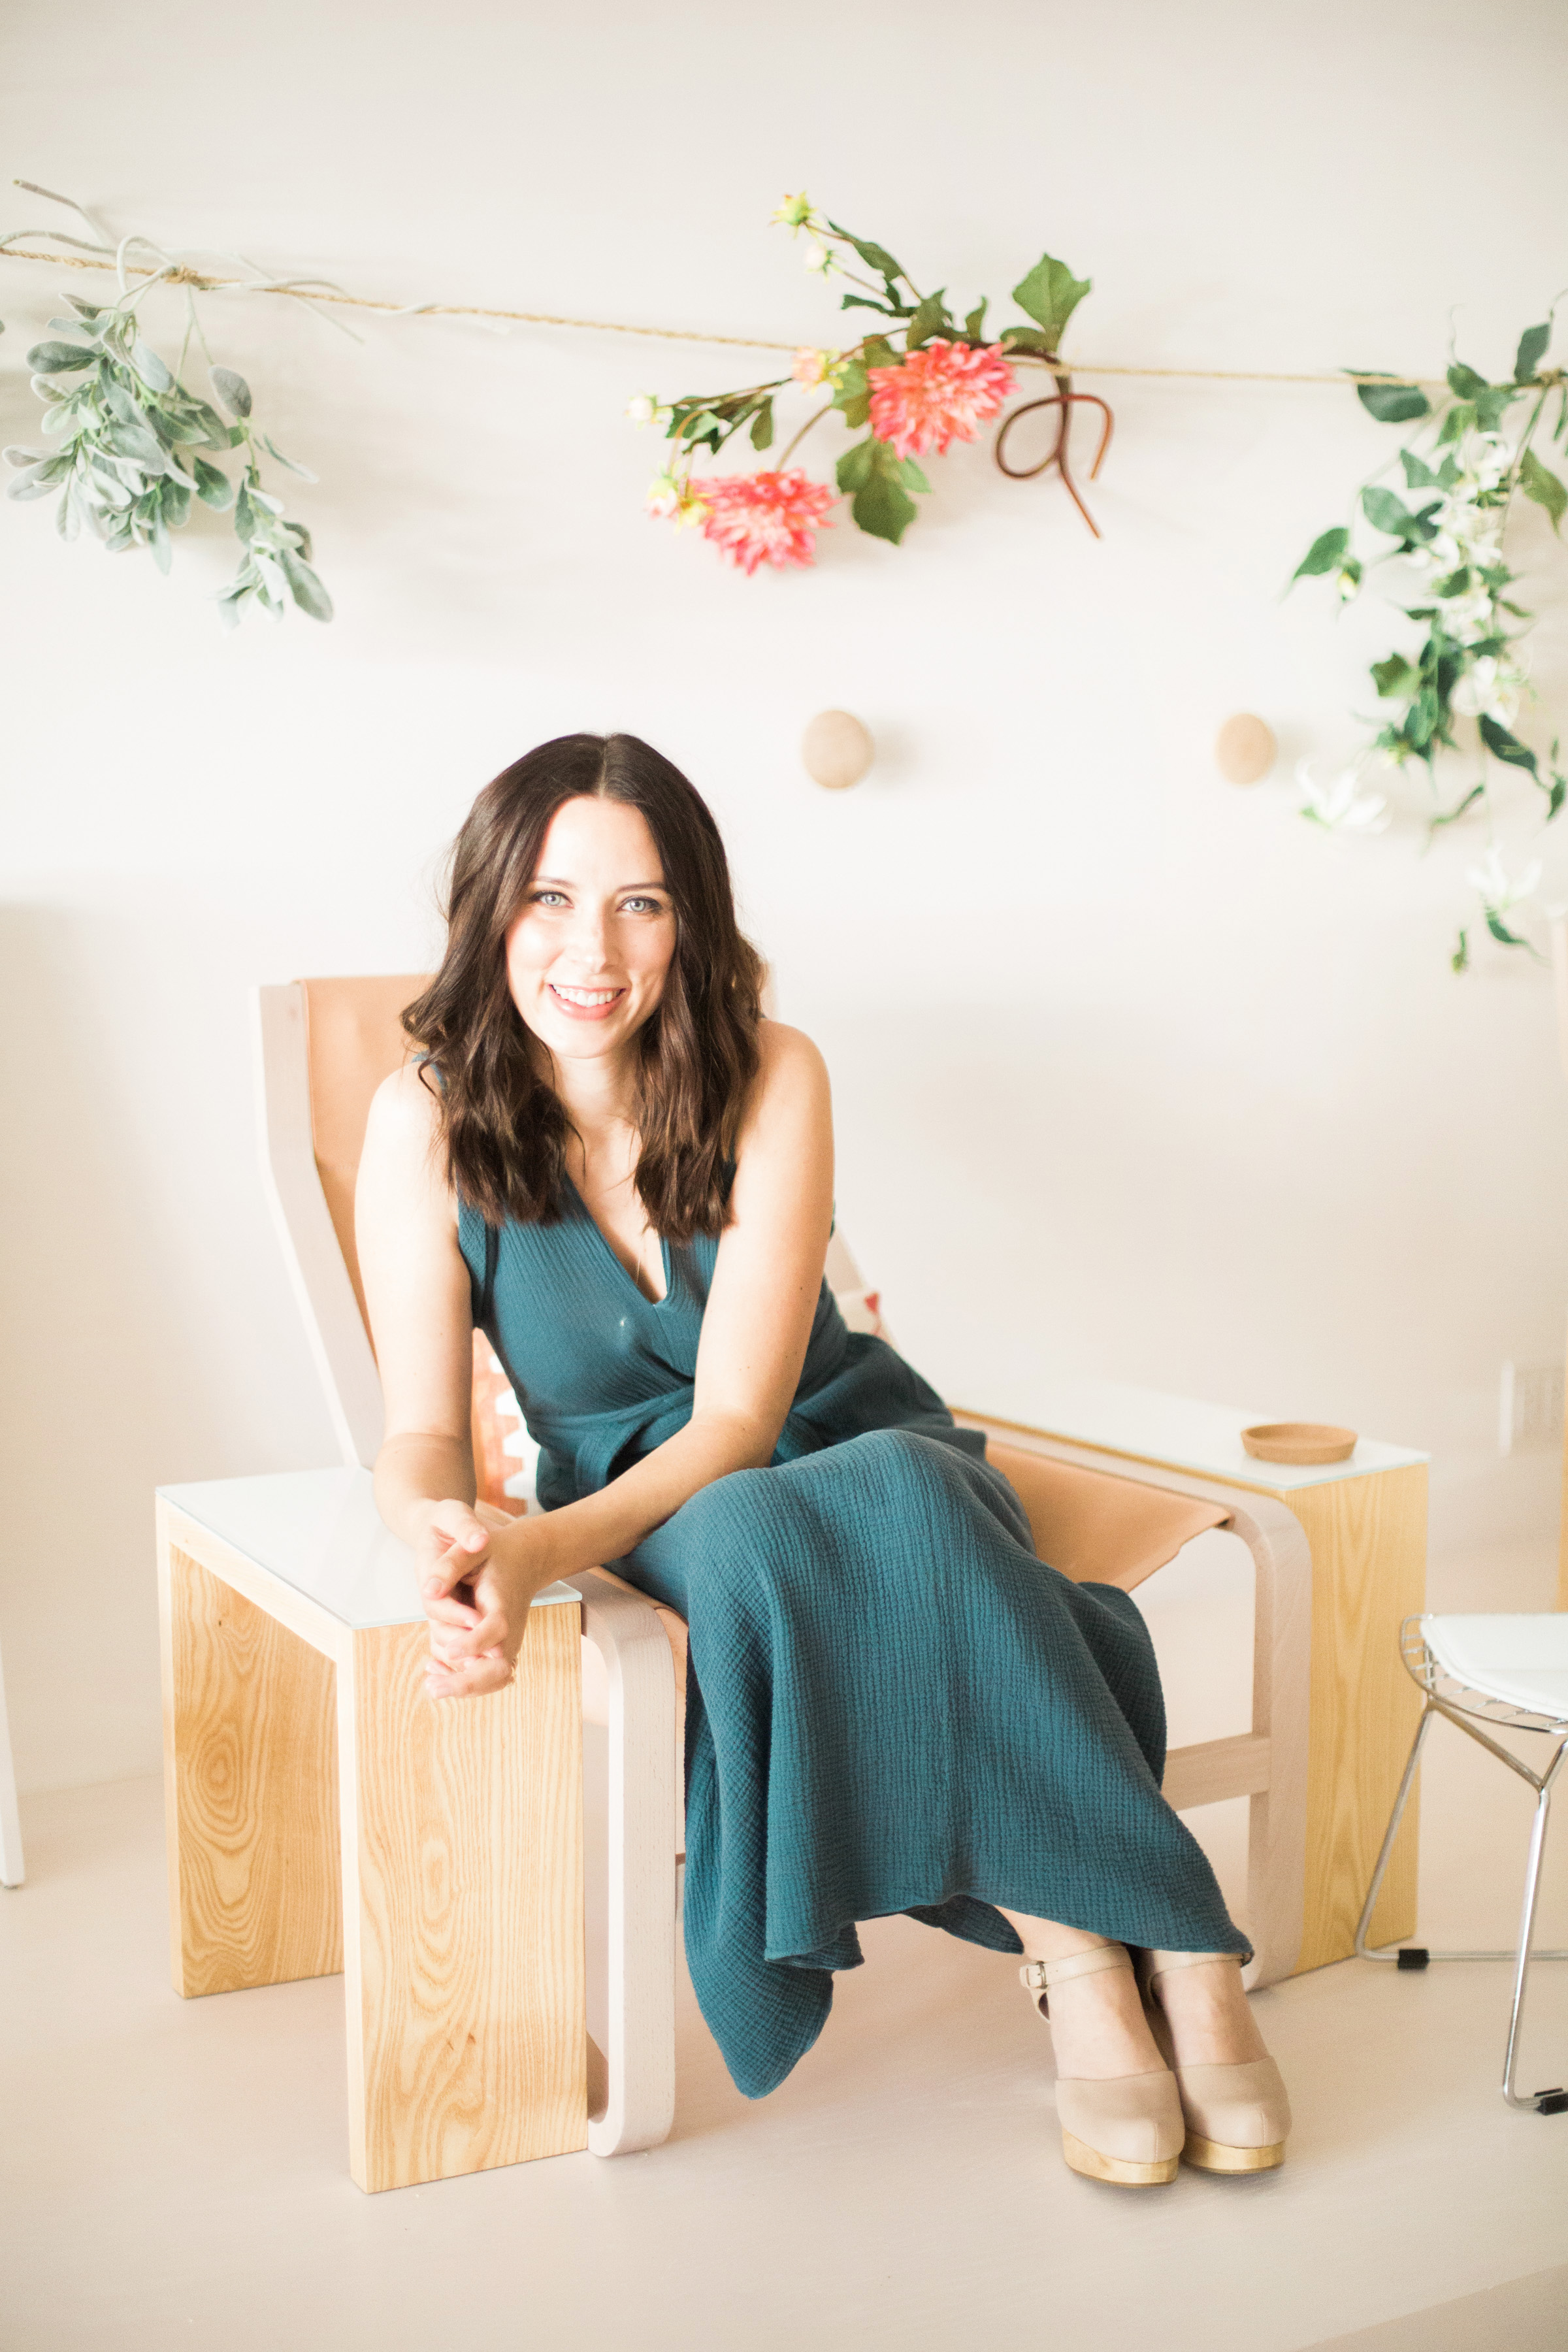 Olive & June Founder Sarah Gibson Tuttle Beauty Routine